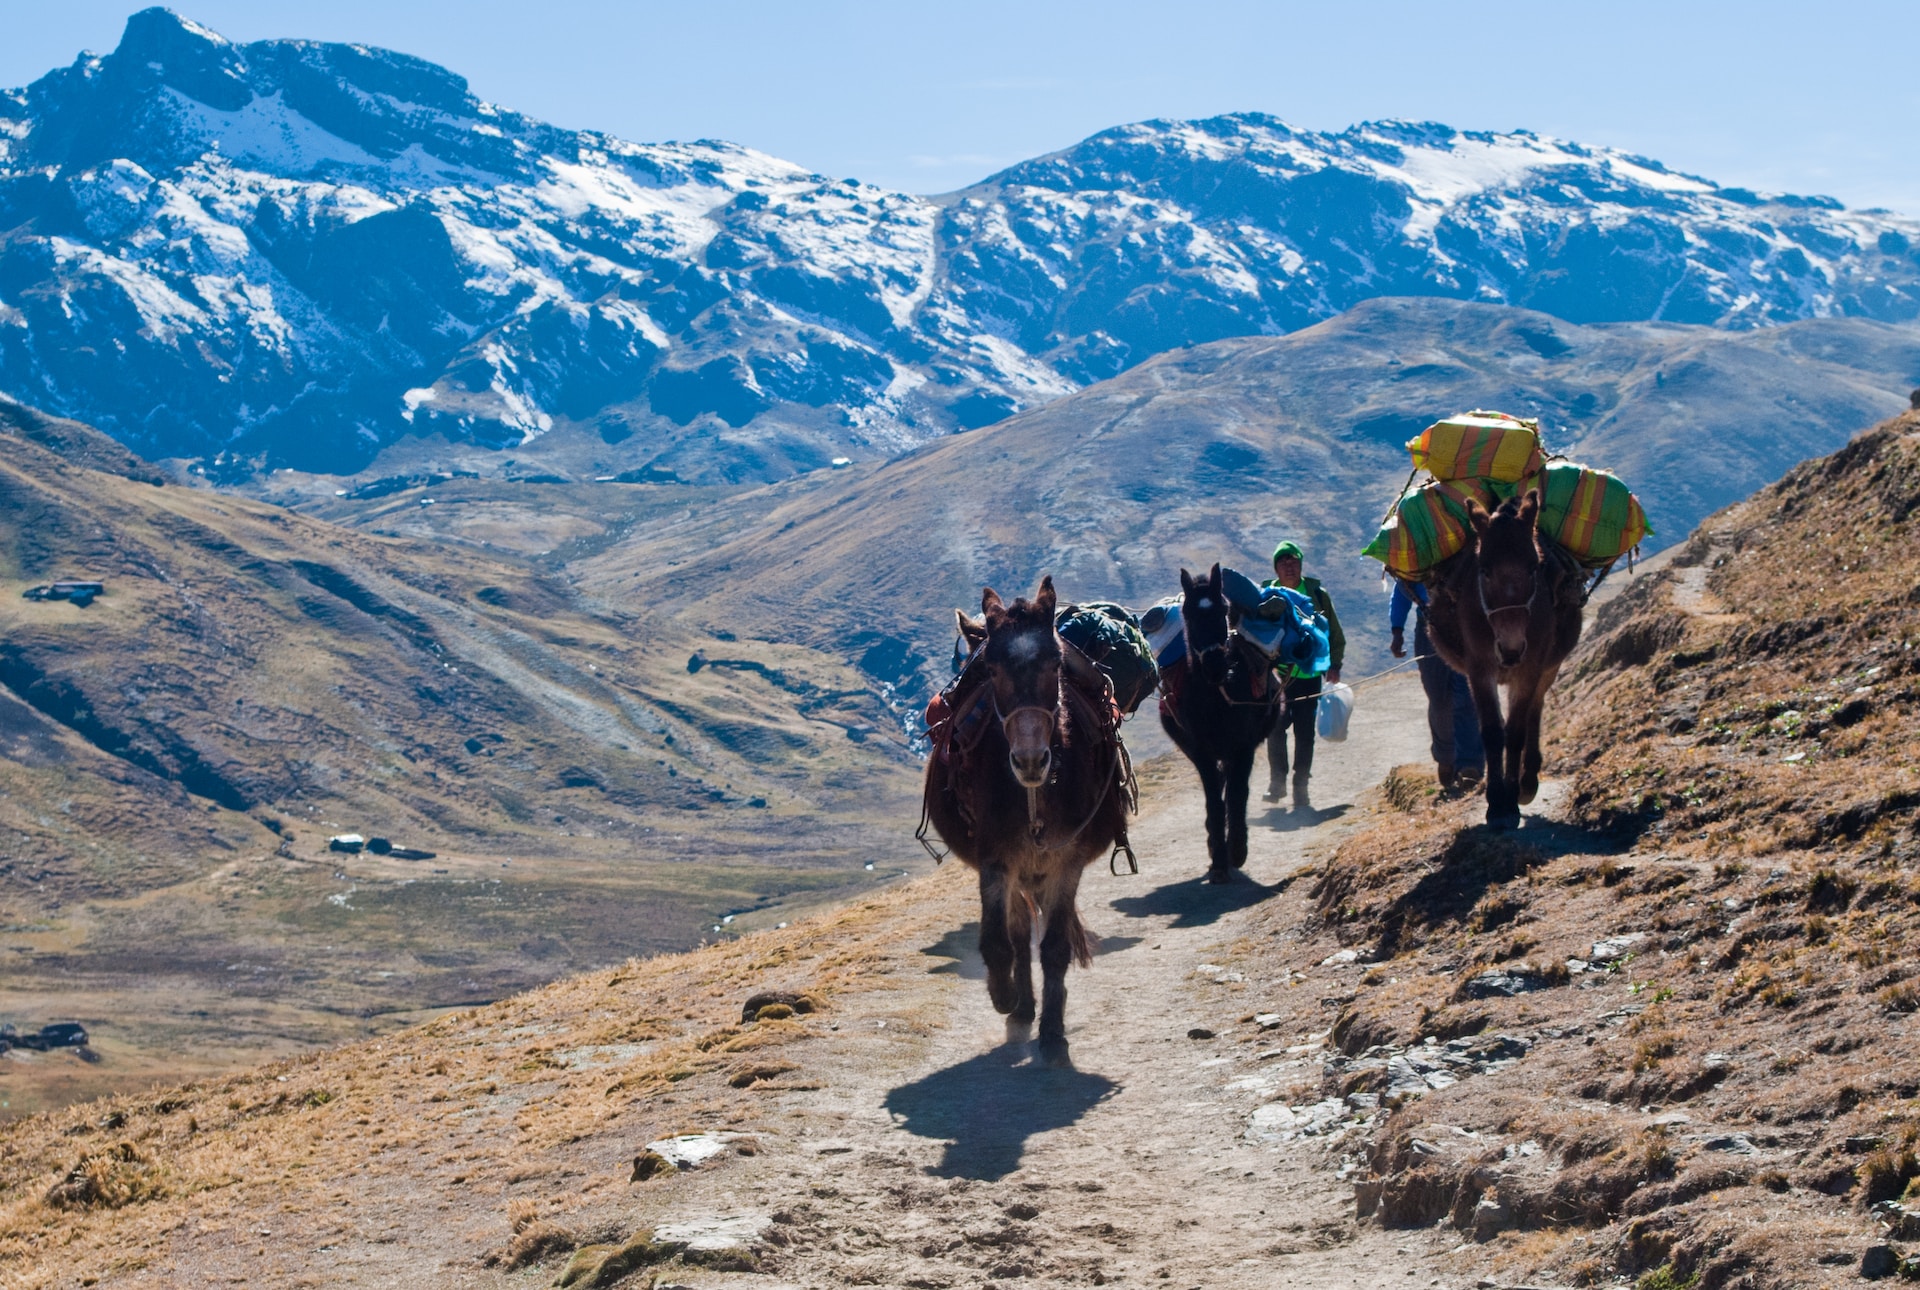 Discover The Best Of South America: From The Andes To The Galapagos On An Adventure Tour